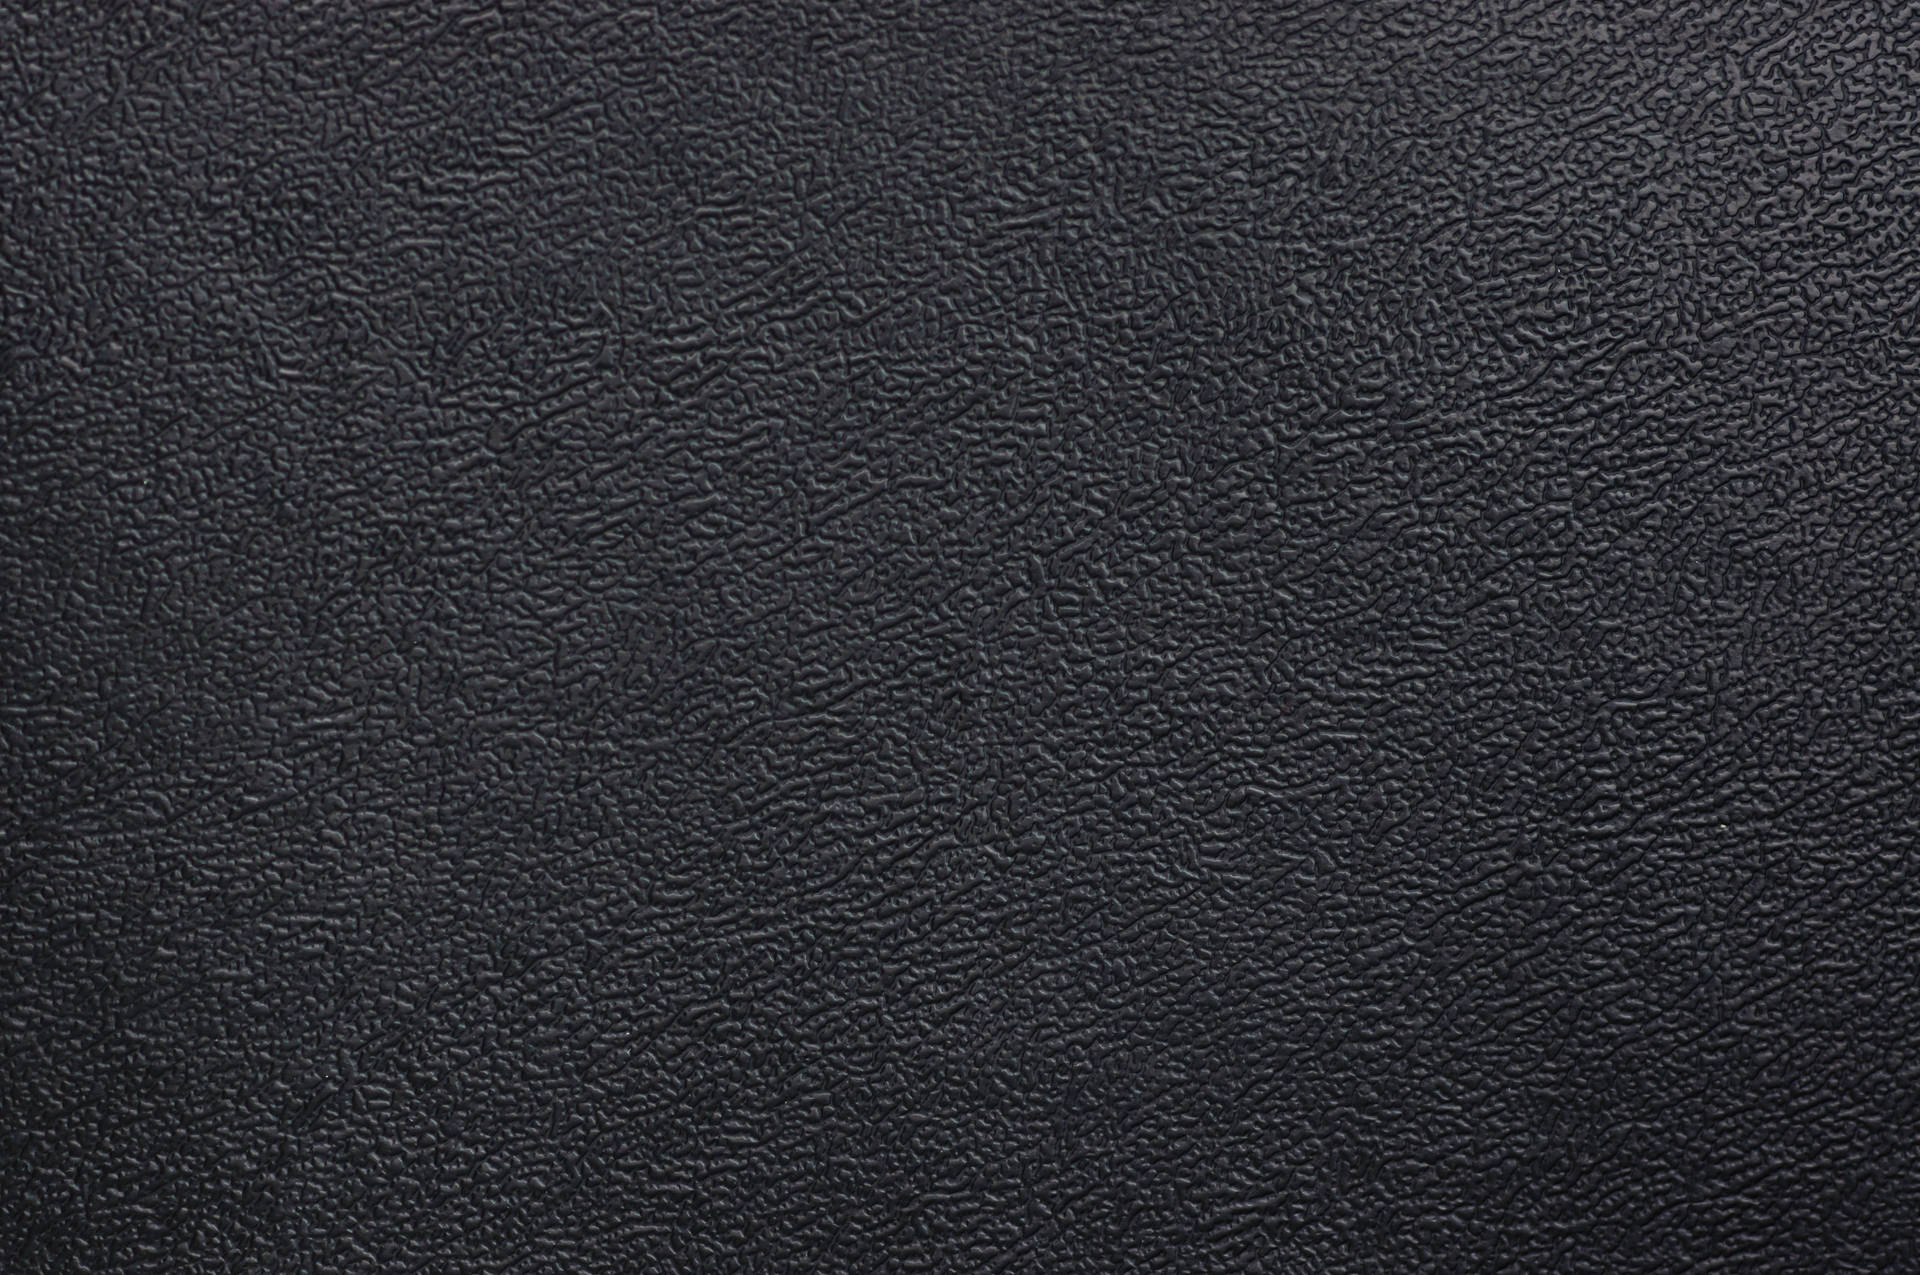 Textured Black Leather Background